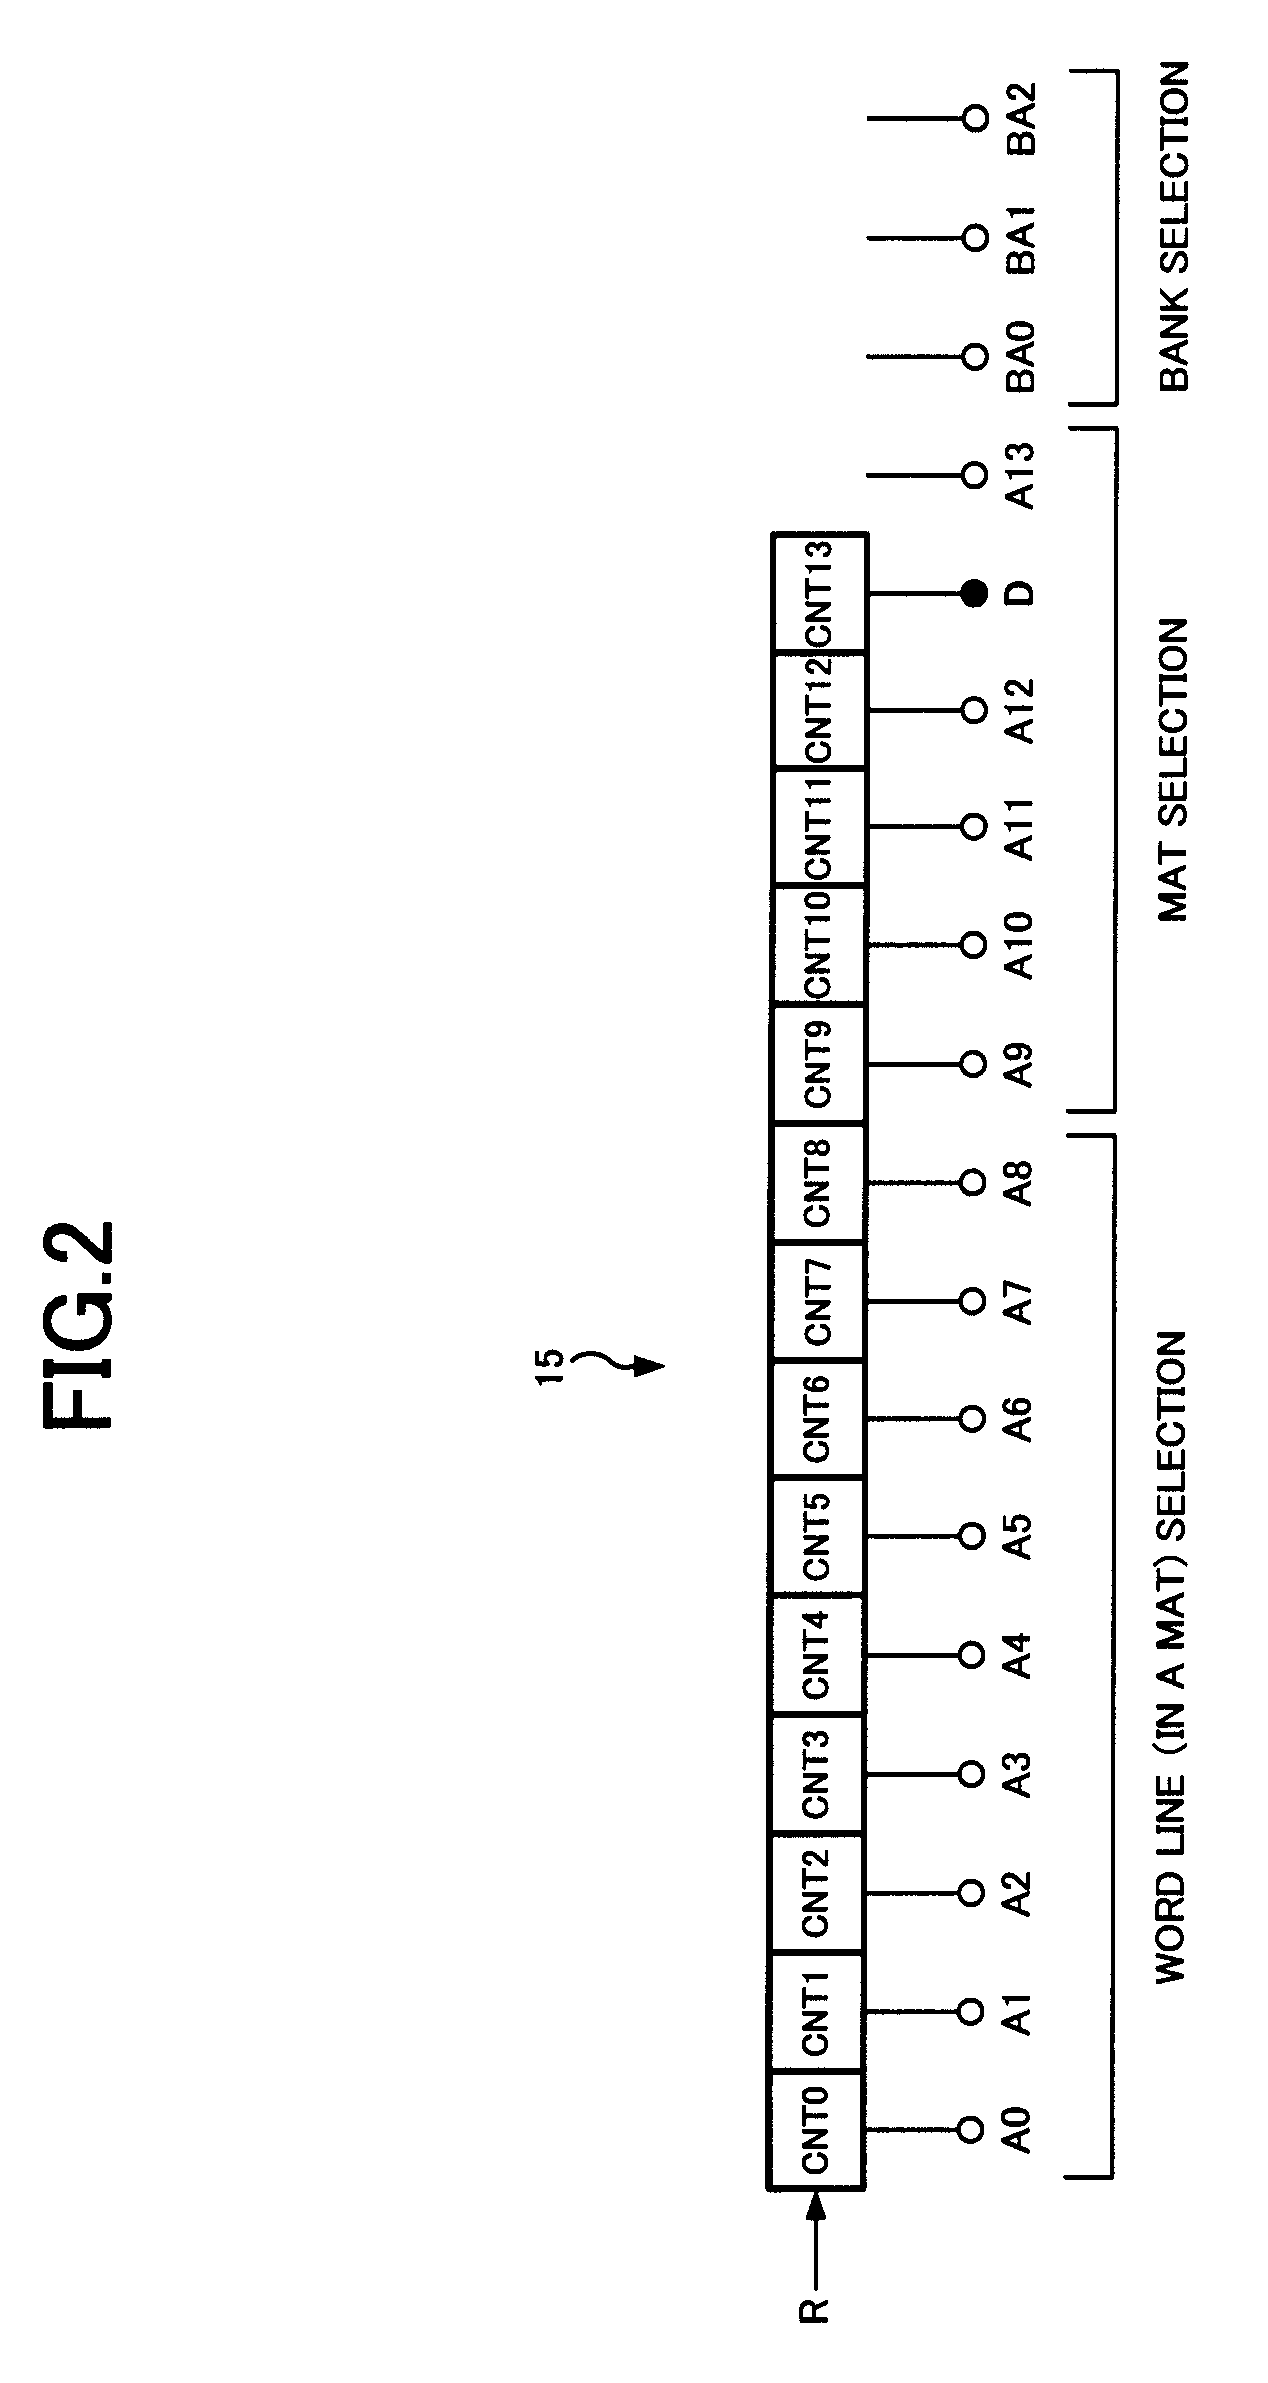 Semiconductor memory device which controls refresh of a memory array in normal operation